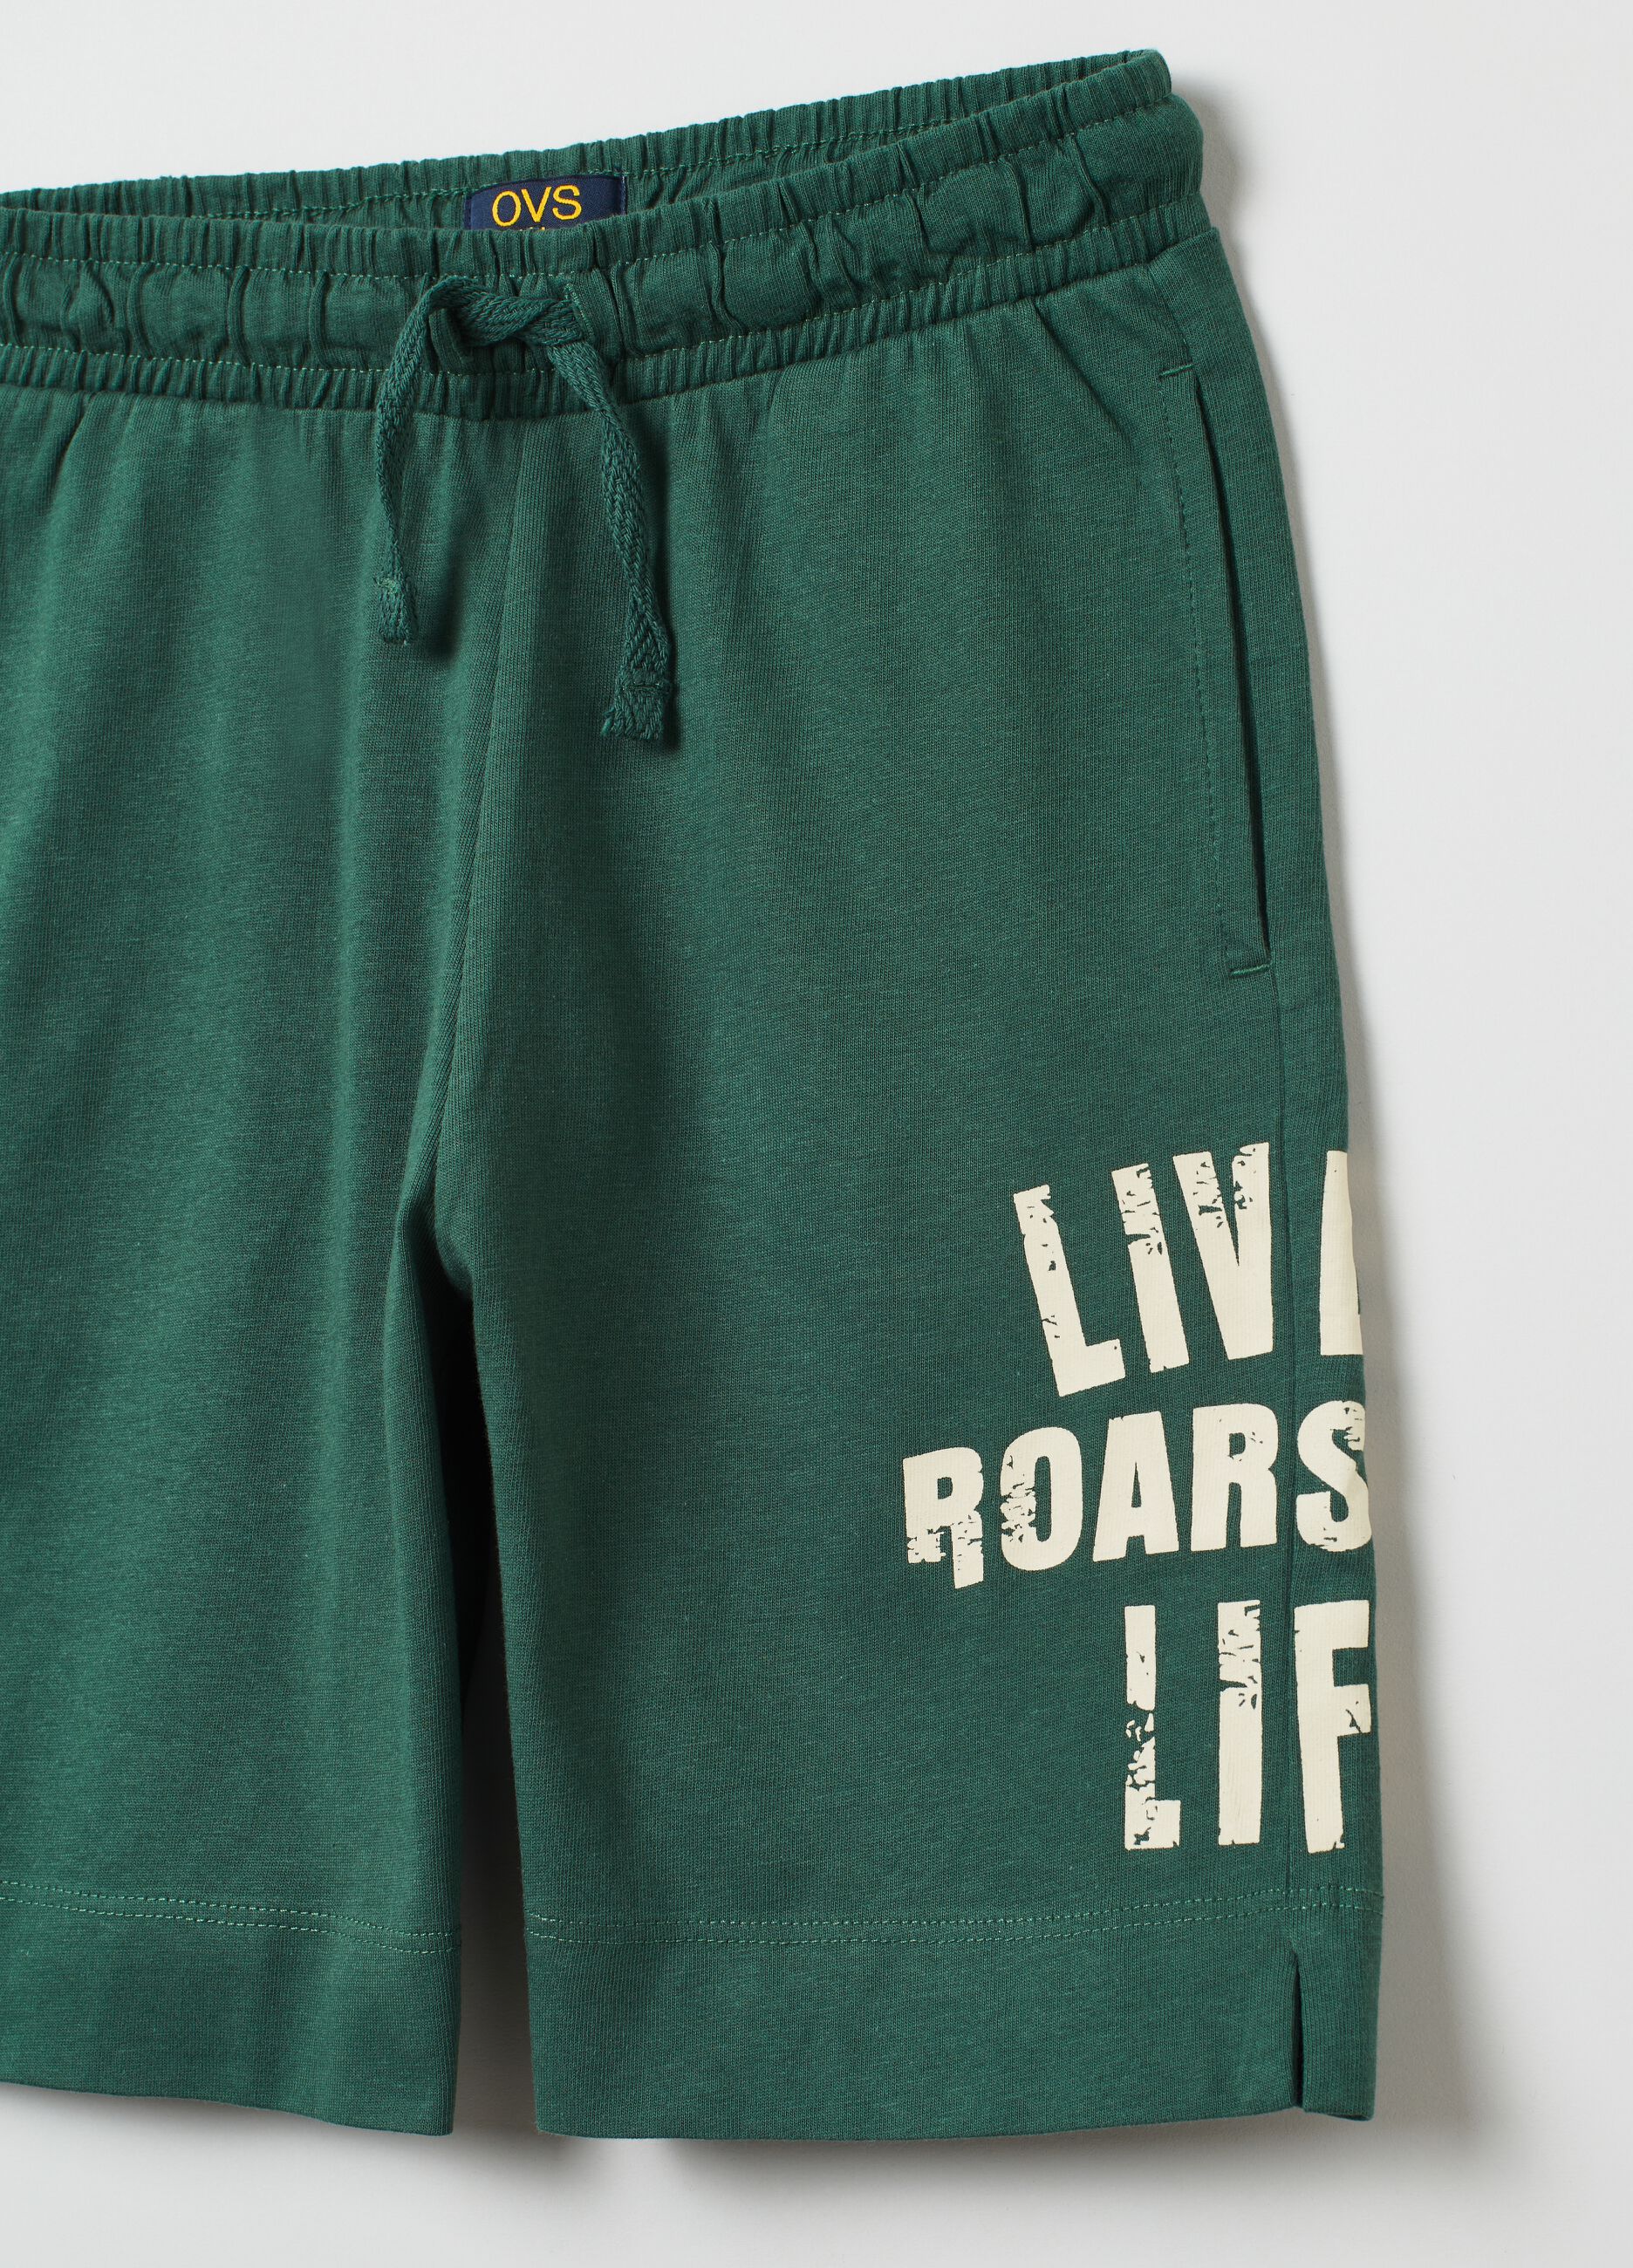 Shorts con coulisse e stampa lettering